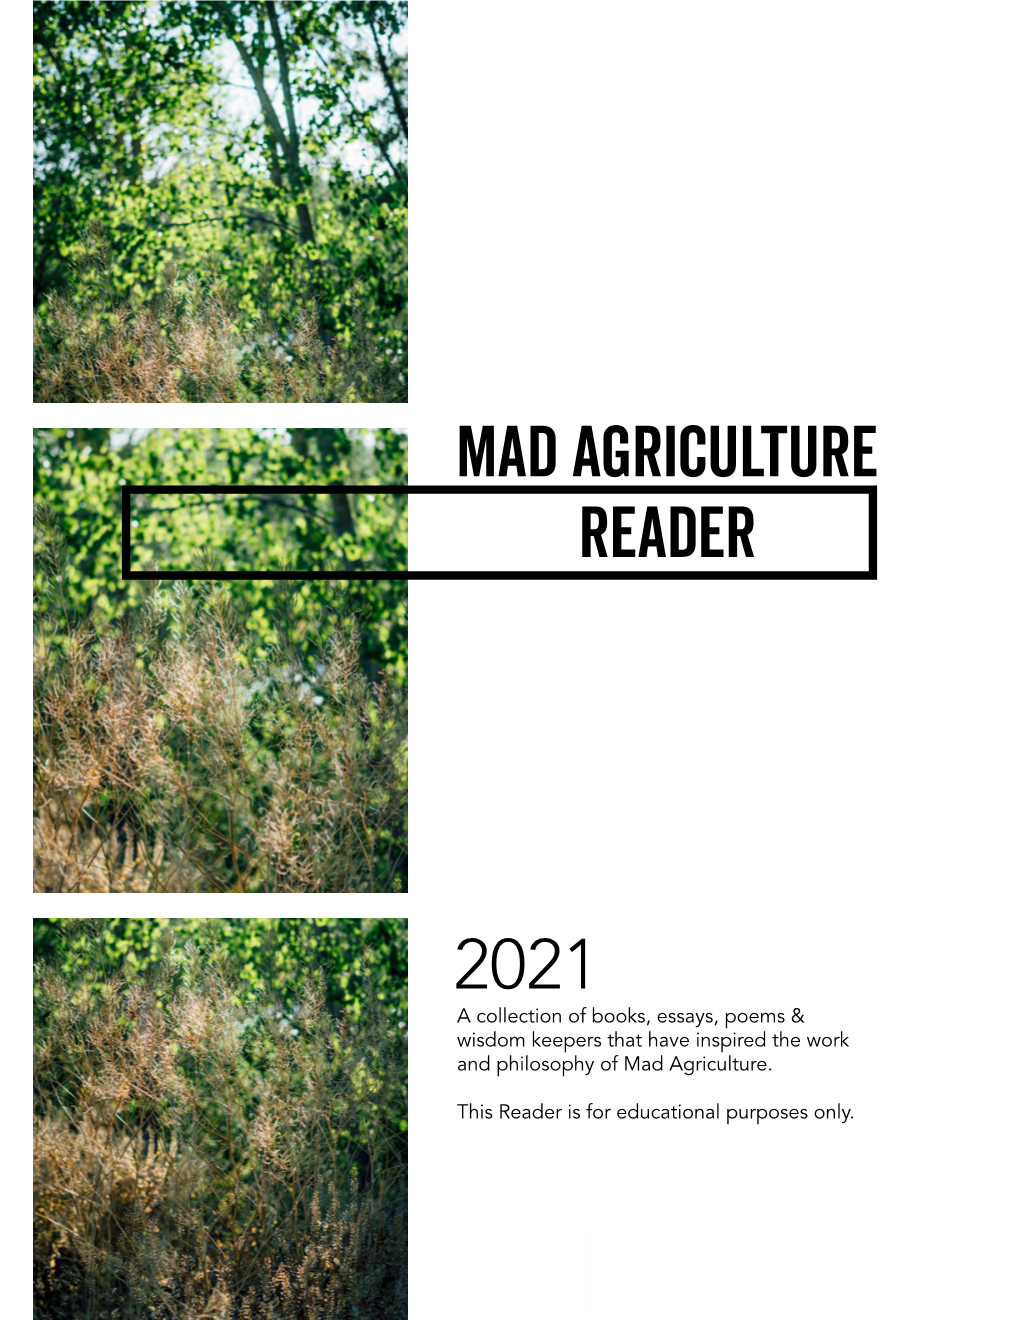 Mad Agriculture Reader 2021